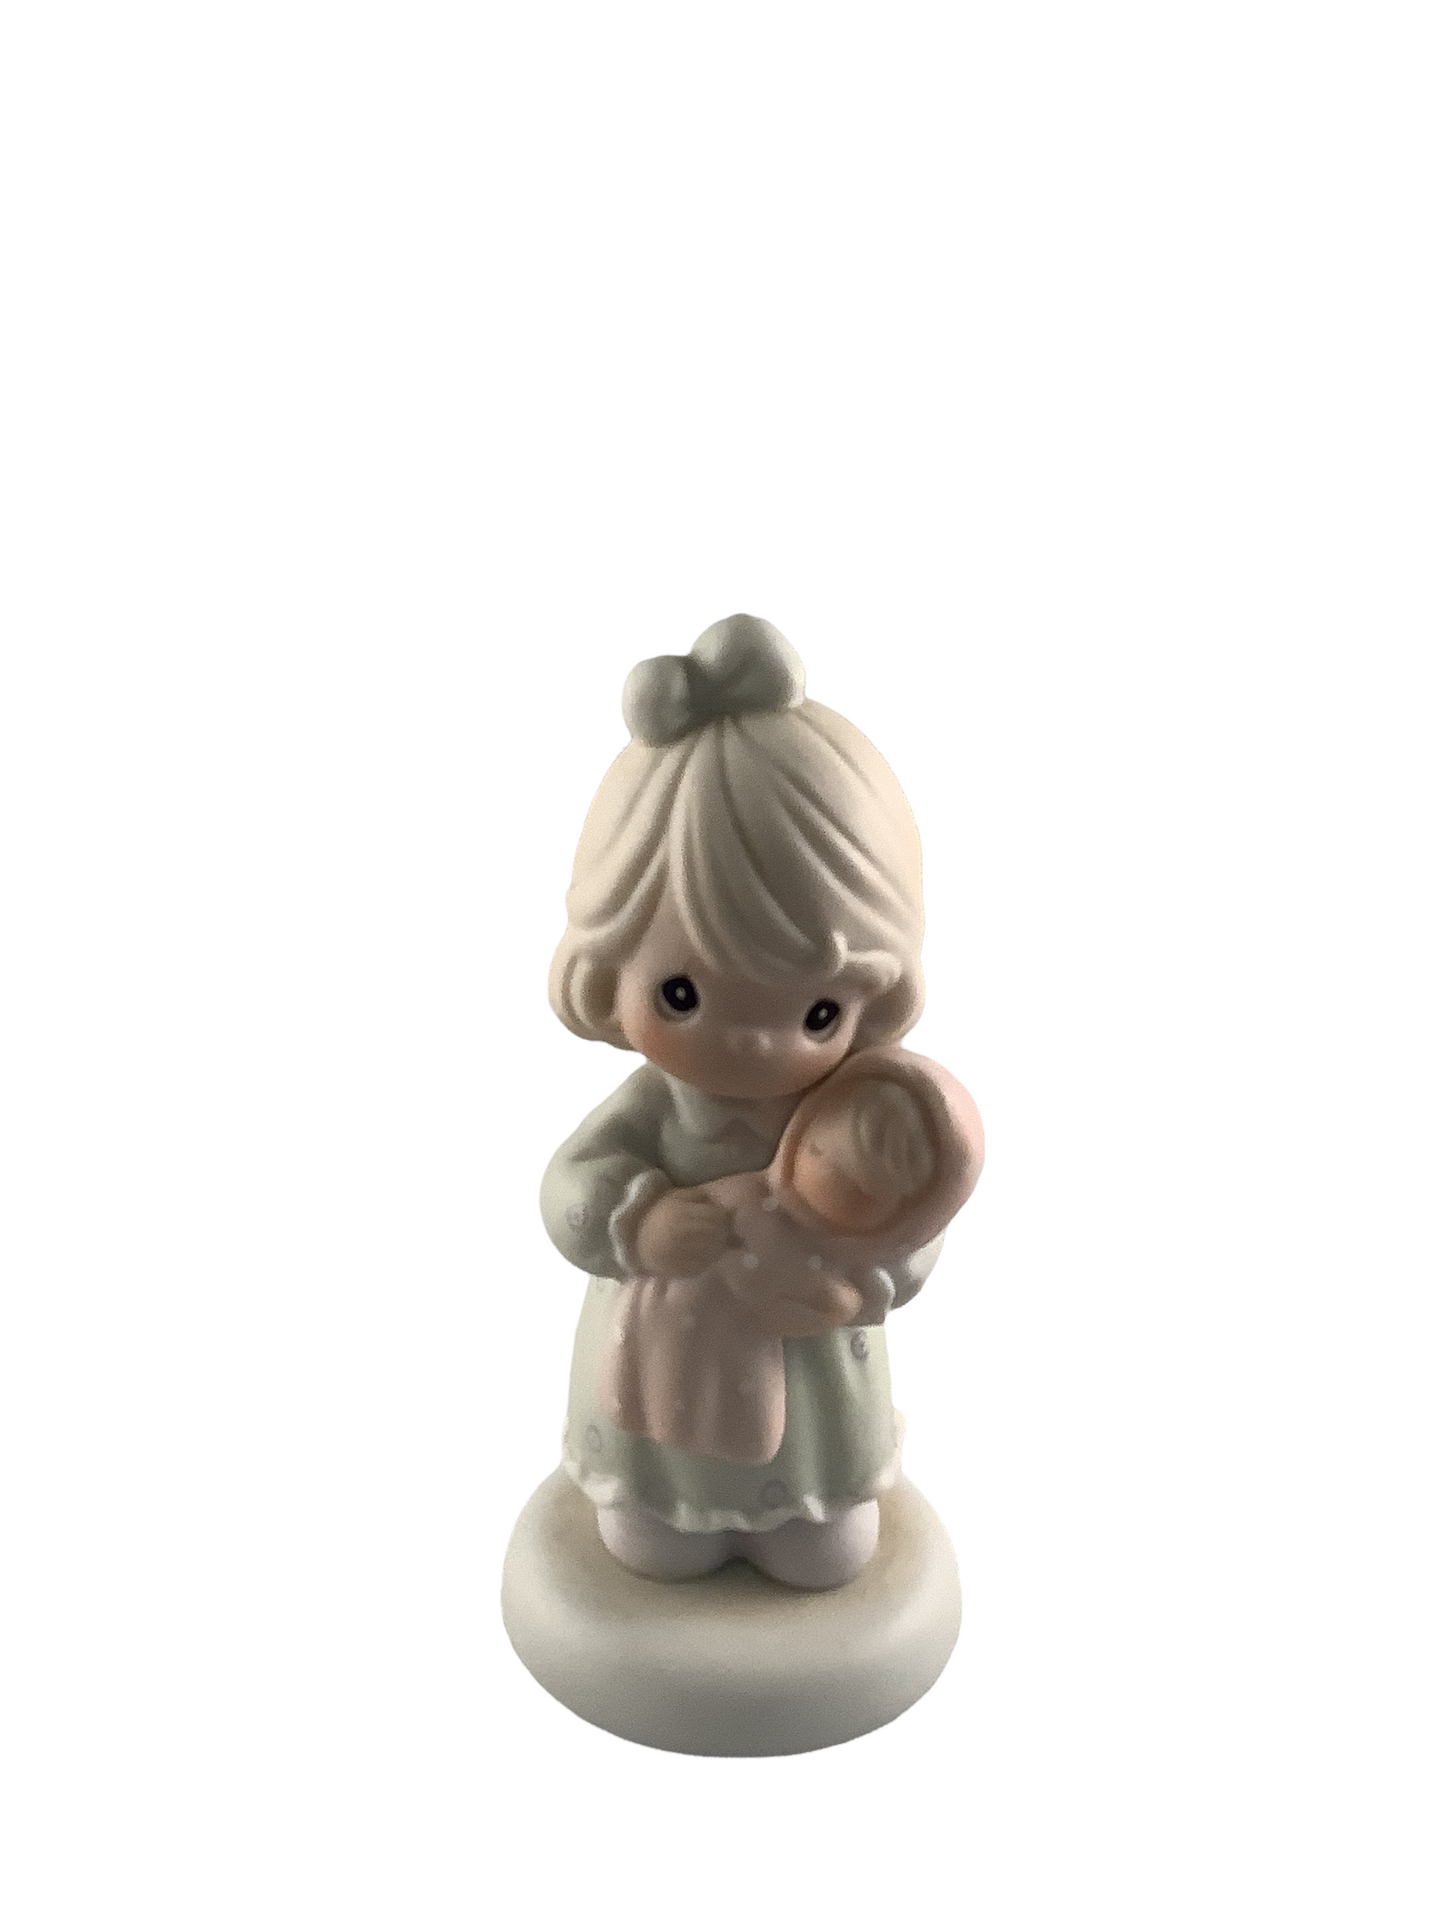 Little Moments All Things Grow With Love - Precious Moment Figurine